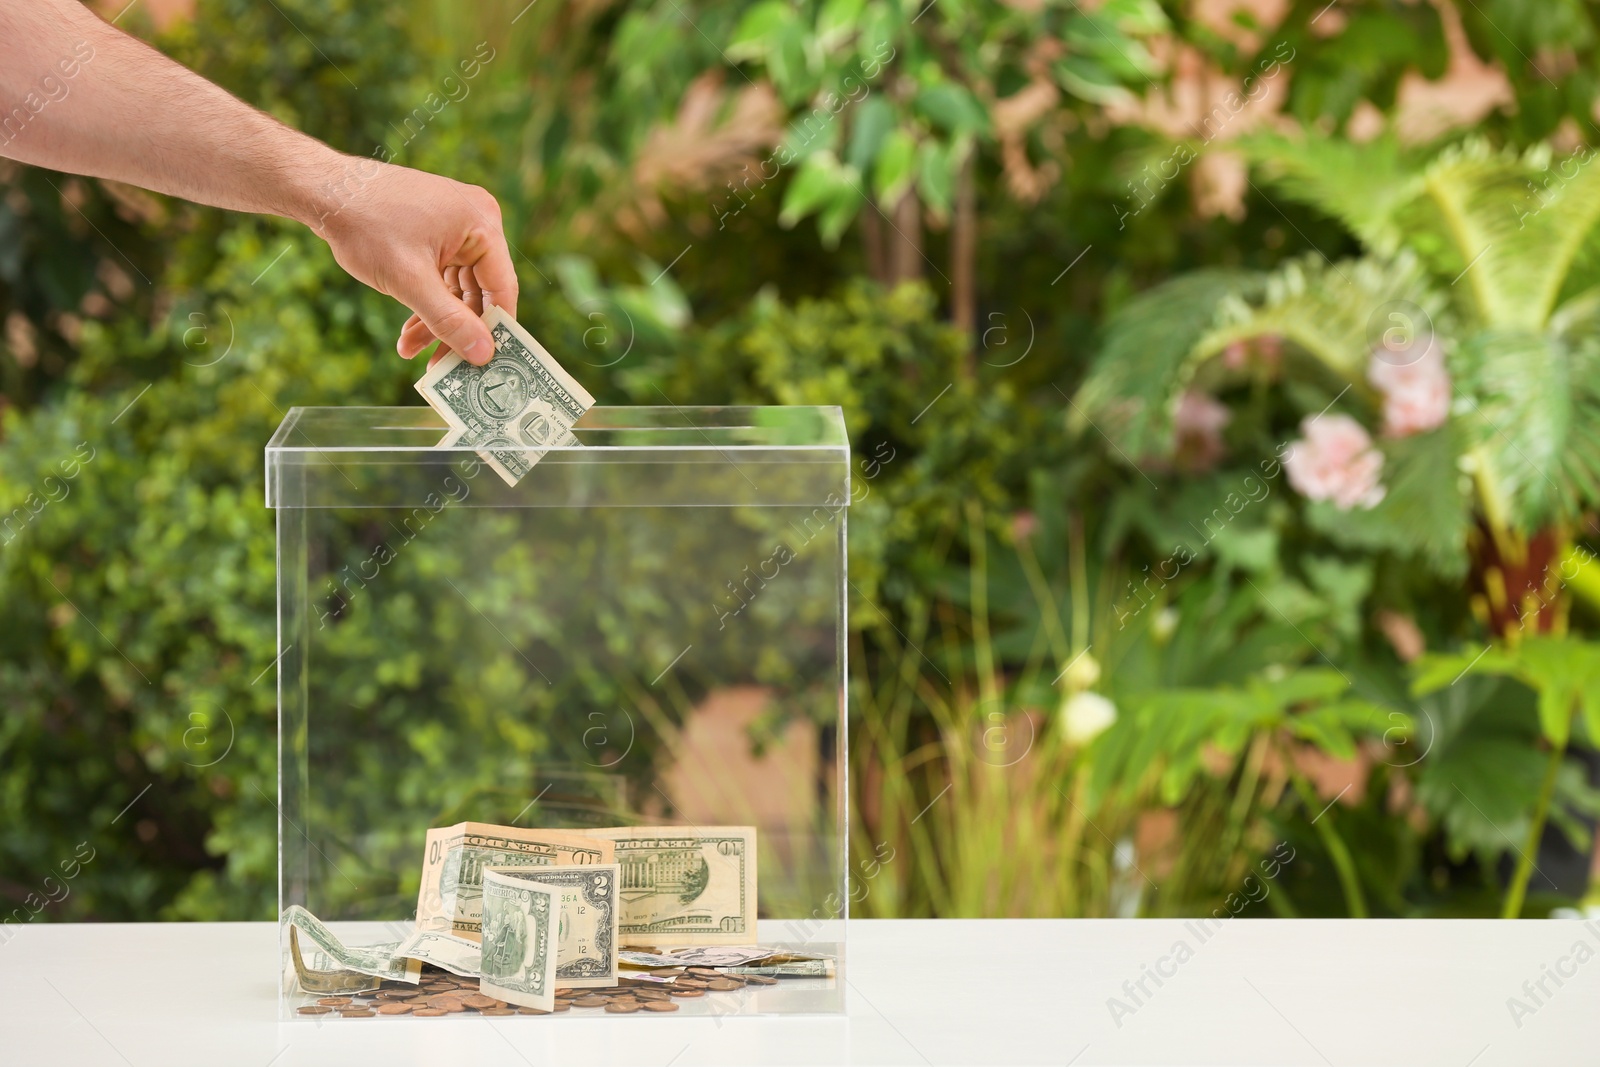 Photo of Man putting money into donation box on table against blurred background, closeup. Space for text